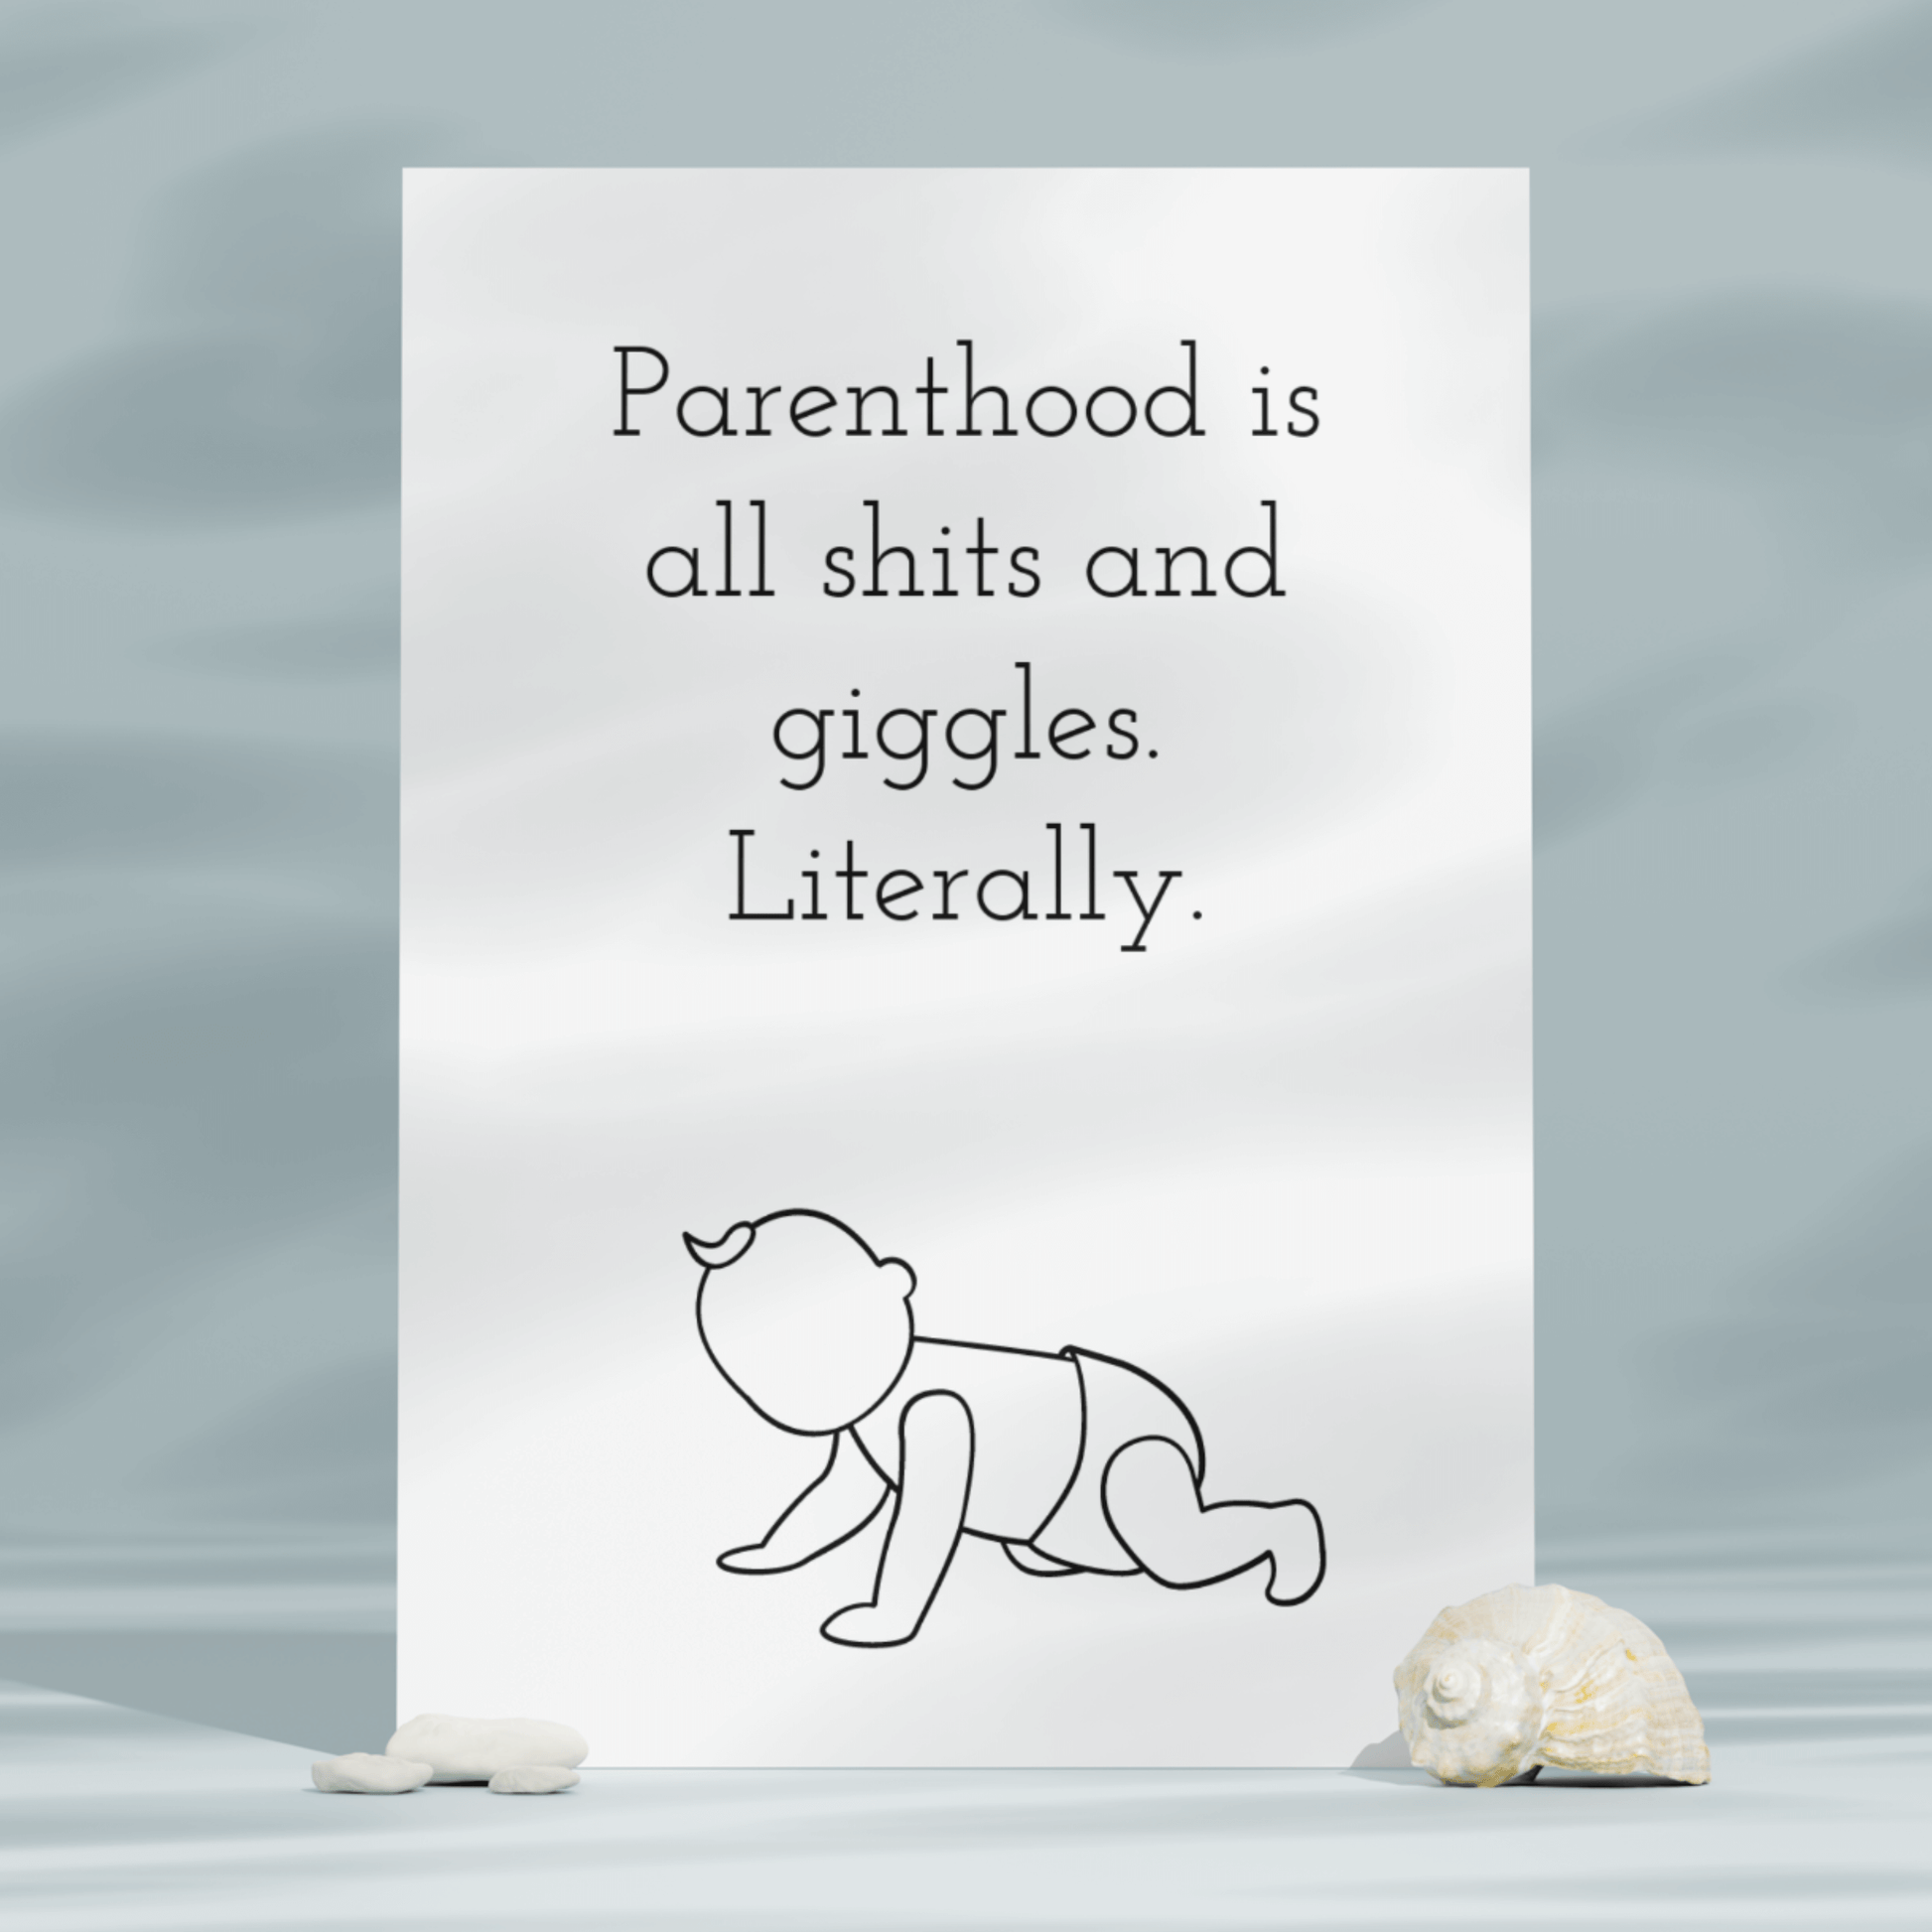 Little Kraken's Parenthood Is Shits and Giggles, New Baby Cards for £3.50 each